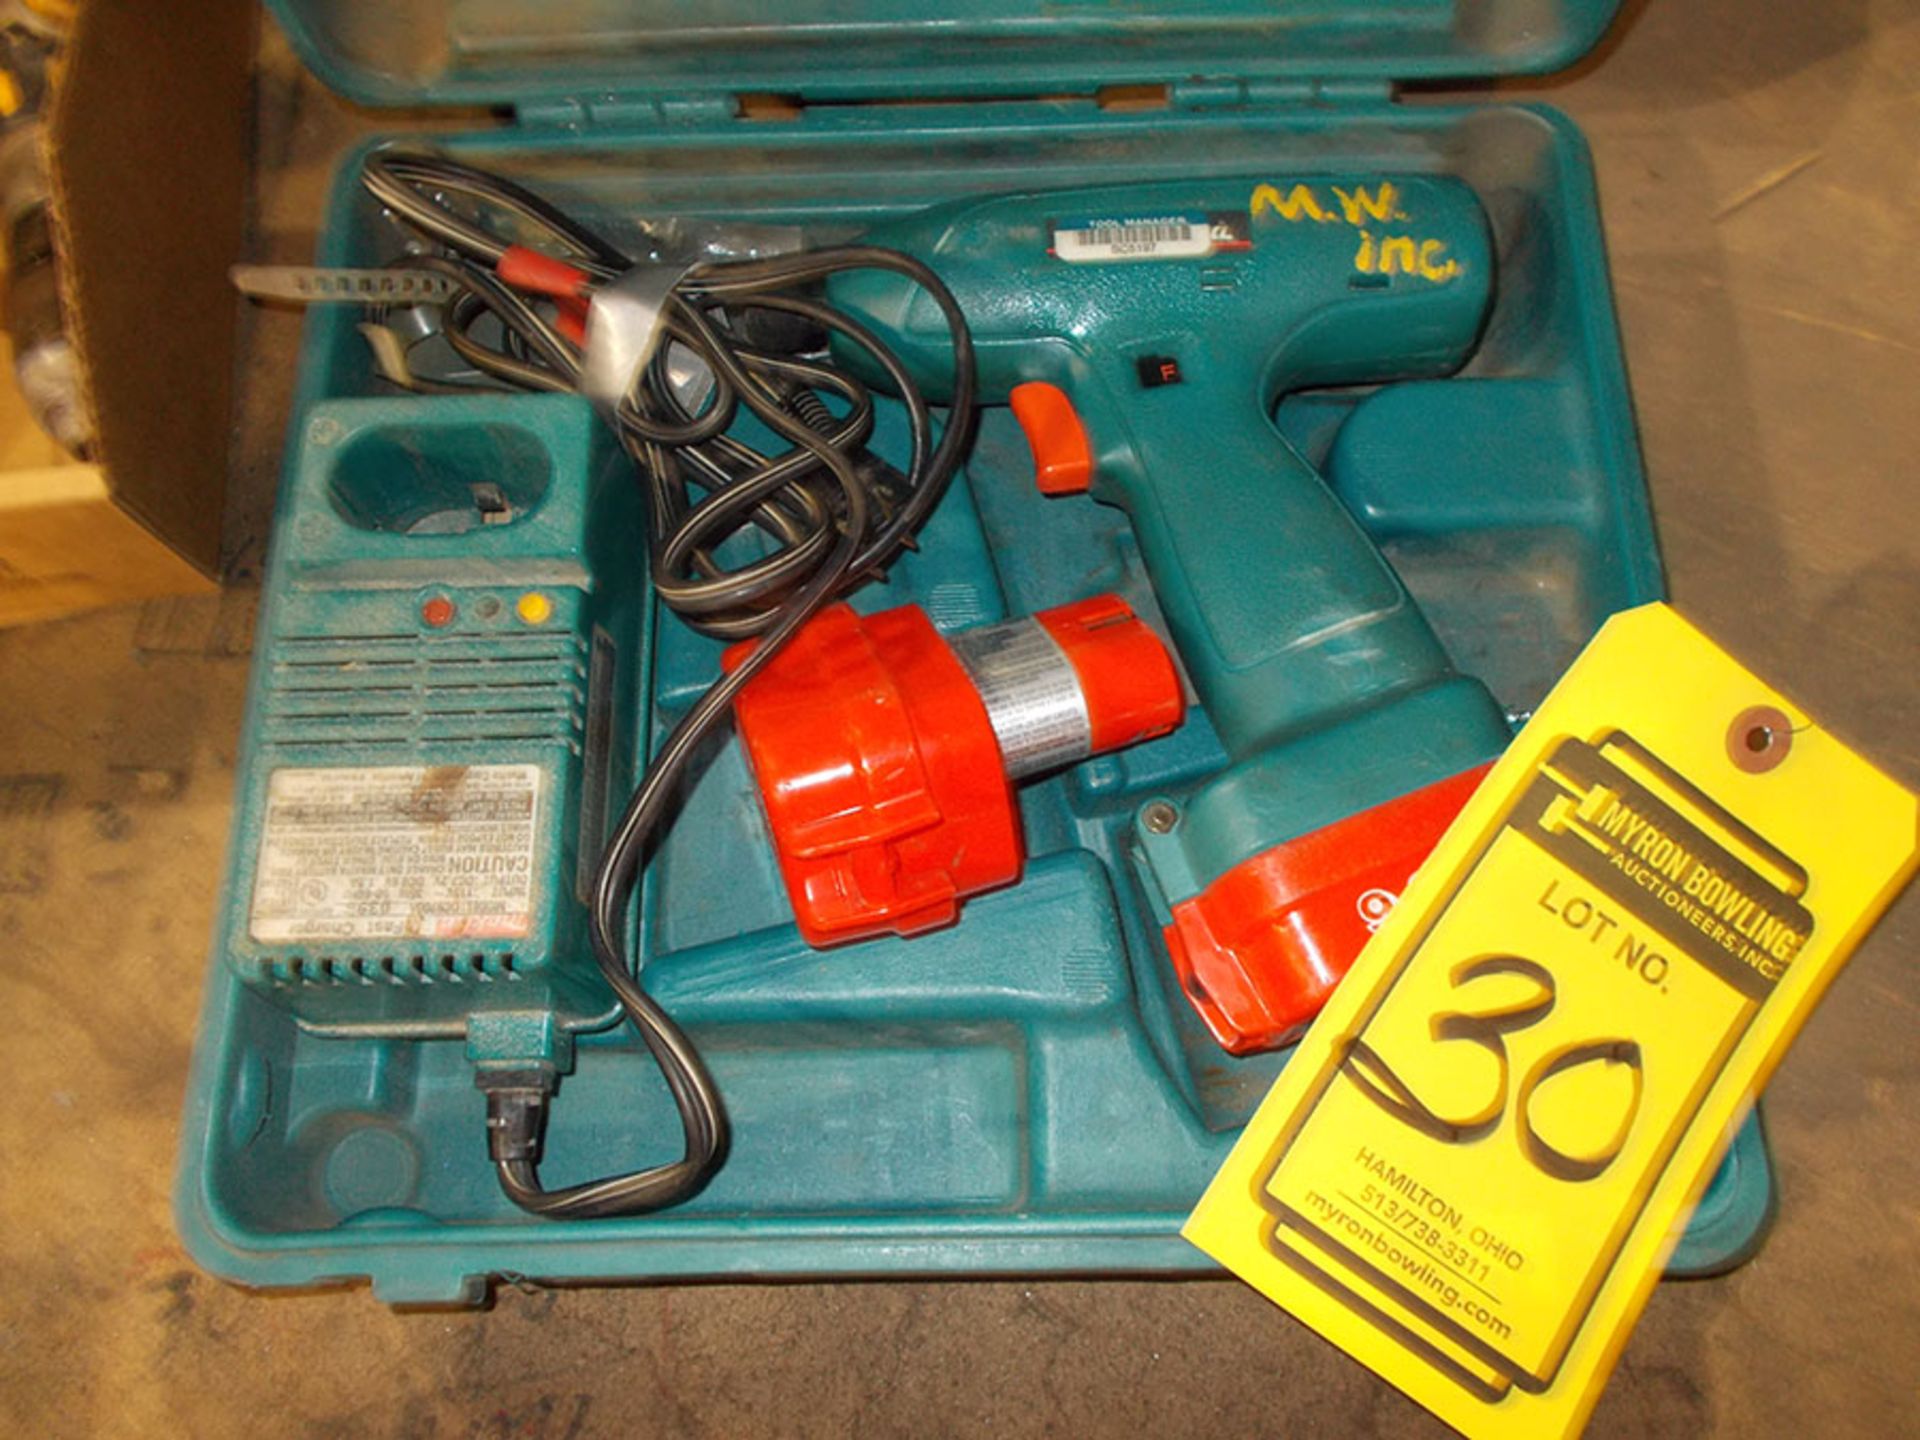 MAKITA 9.6 VOLT BATTERY DRILL WITH QUICK CHUCK & CHARGER